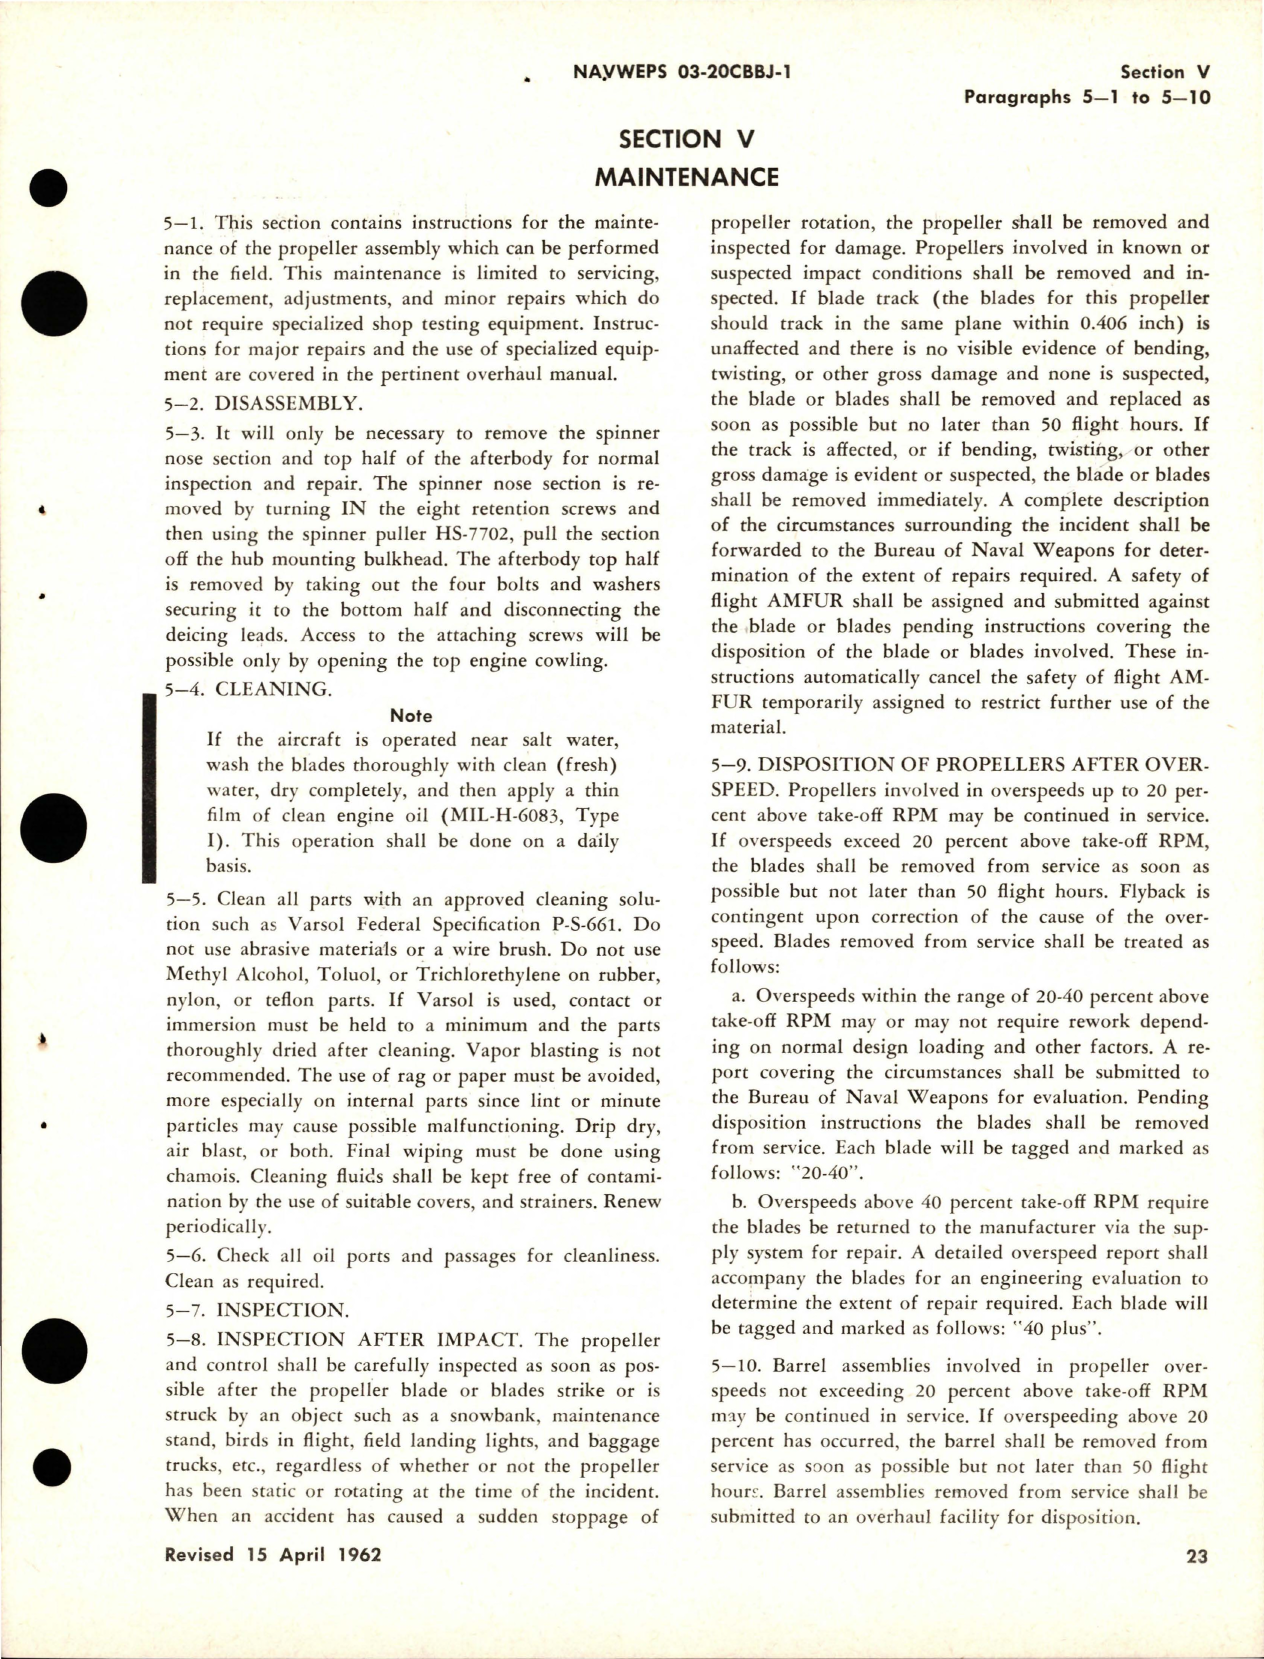 Sample page 7 from AirCorps Library document: Operation and Maintenance Instructions for Variable Pitch Propeller - Models 54H60-69, 54H60-73, 54H60-75, 54H60-85, and 54H60-89